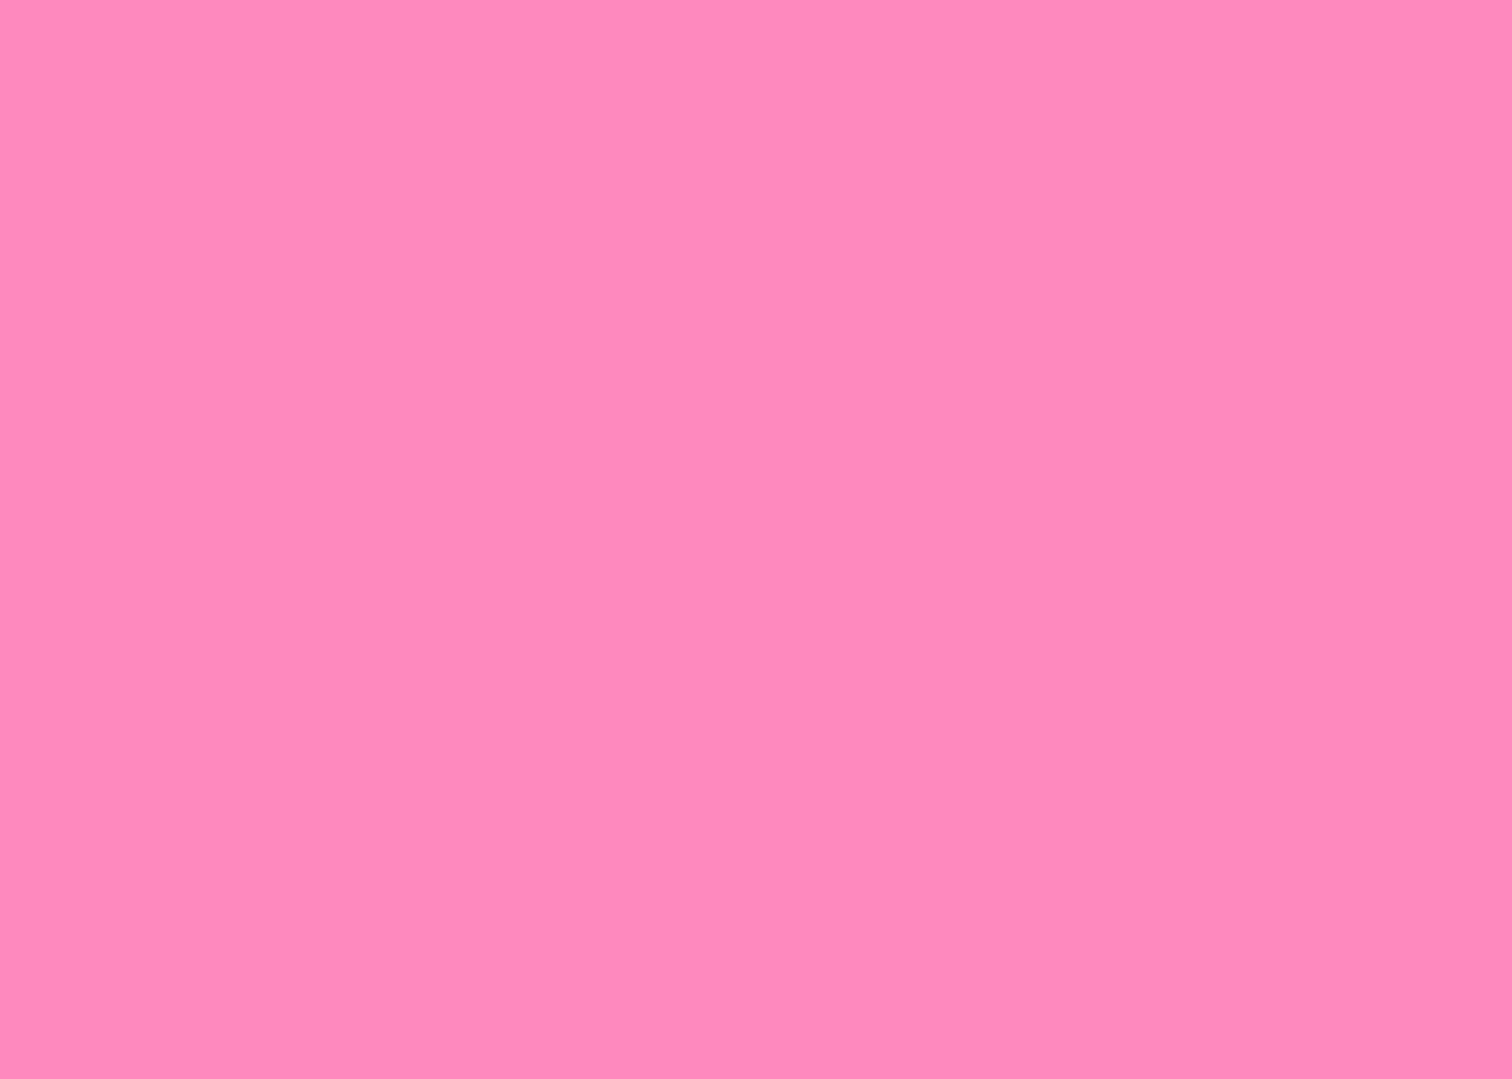 Confetti Cottons Crayola Solids Fabric Tickle Pink  Etsy  Color palette  pink Solid color backgrounds Pink wallpaper